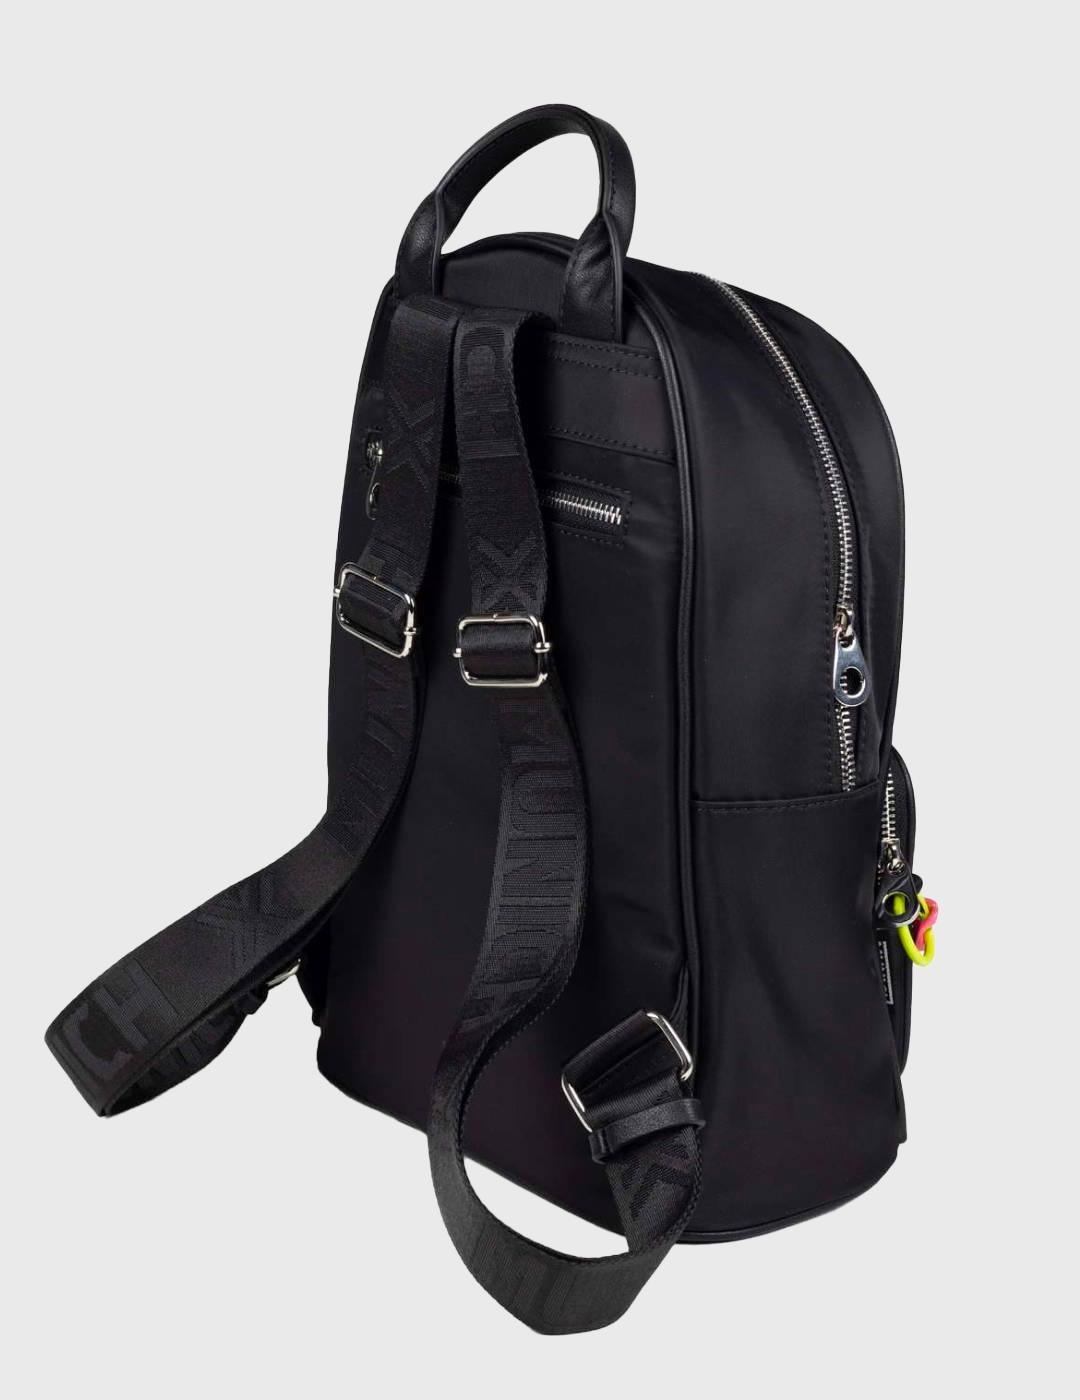 Mochila Munich MH Backpack negra para hombre y mujer